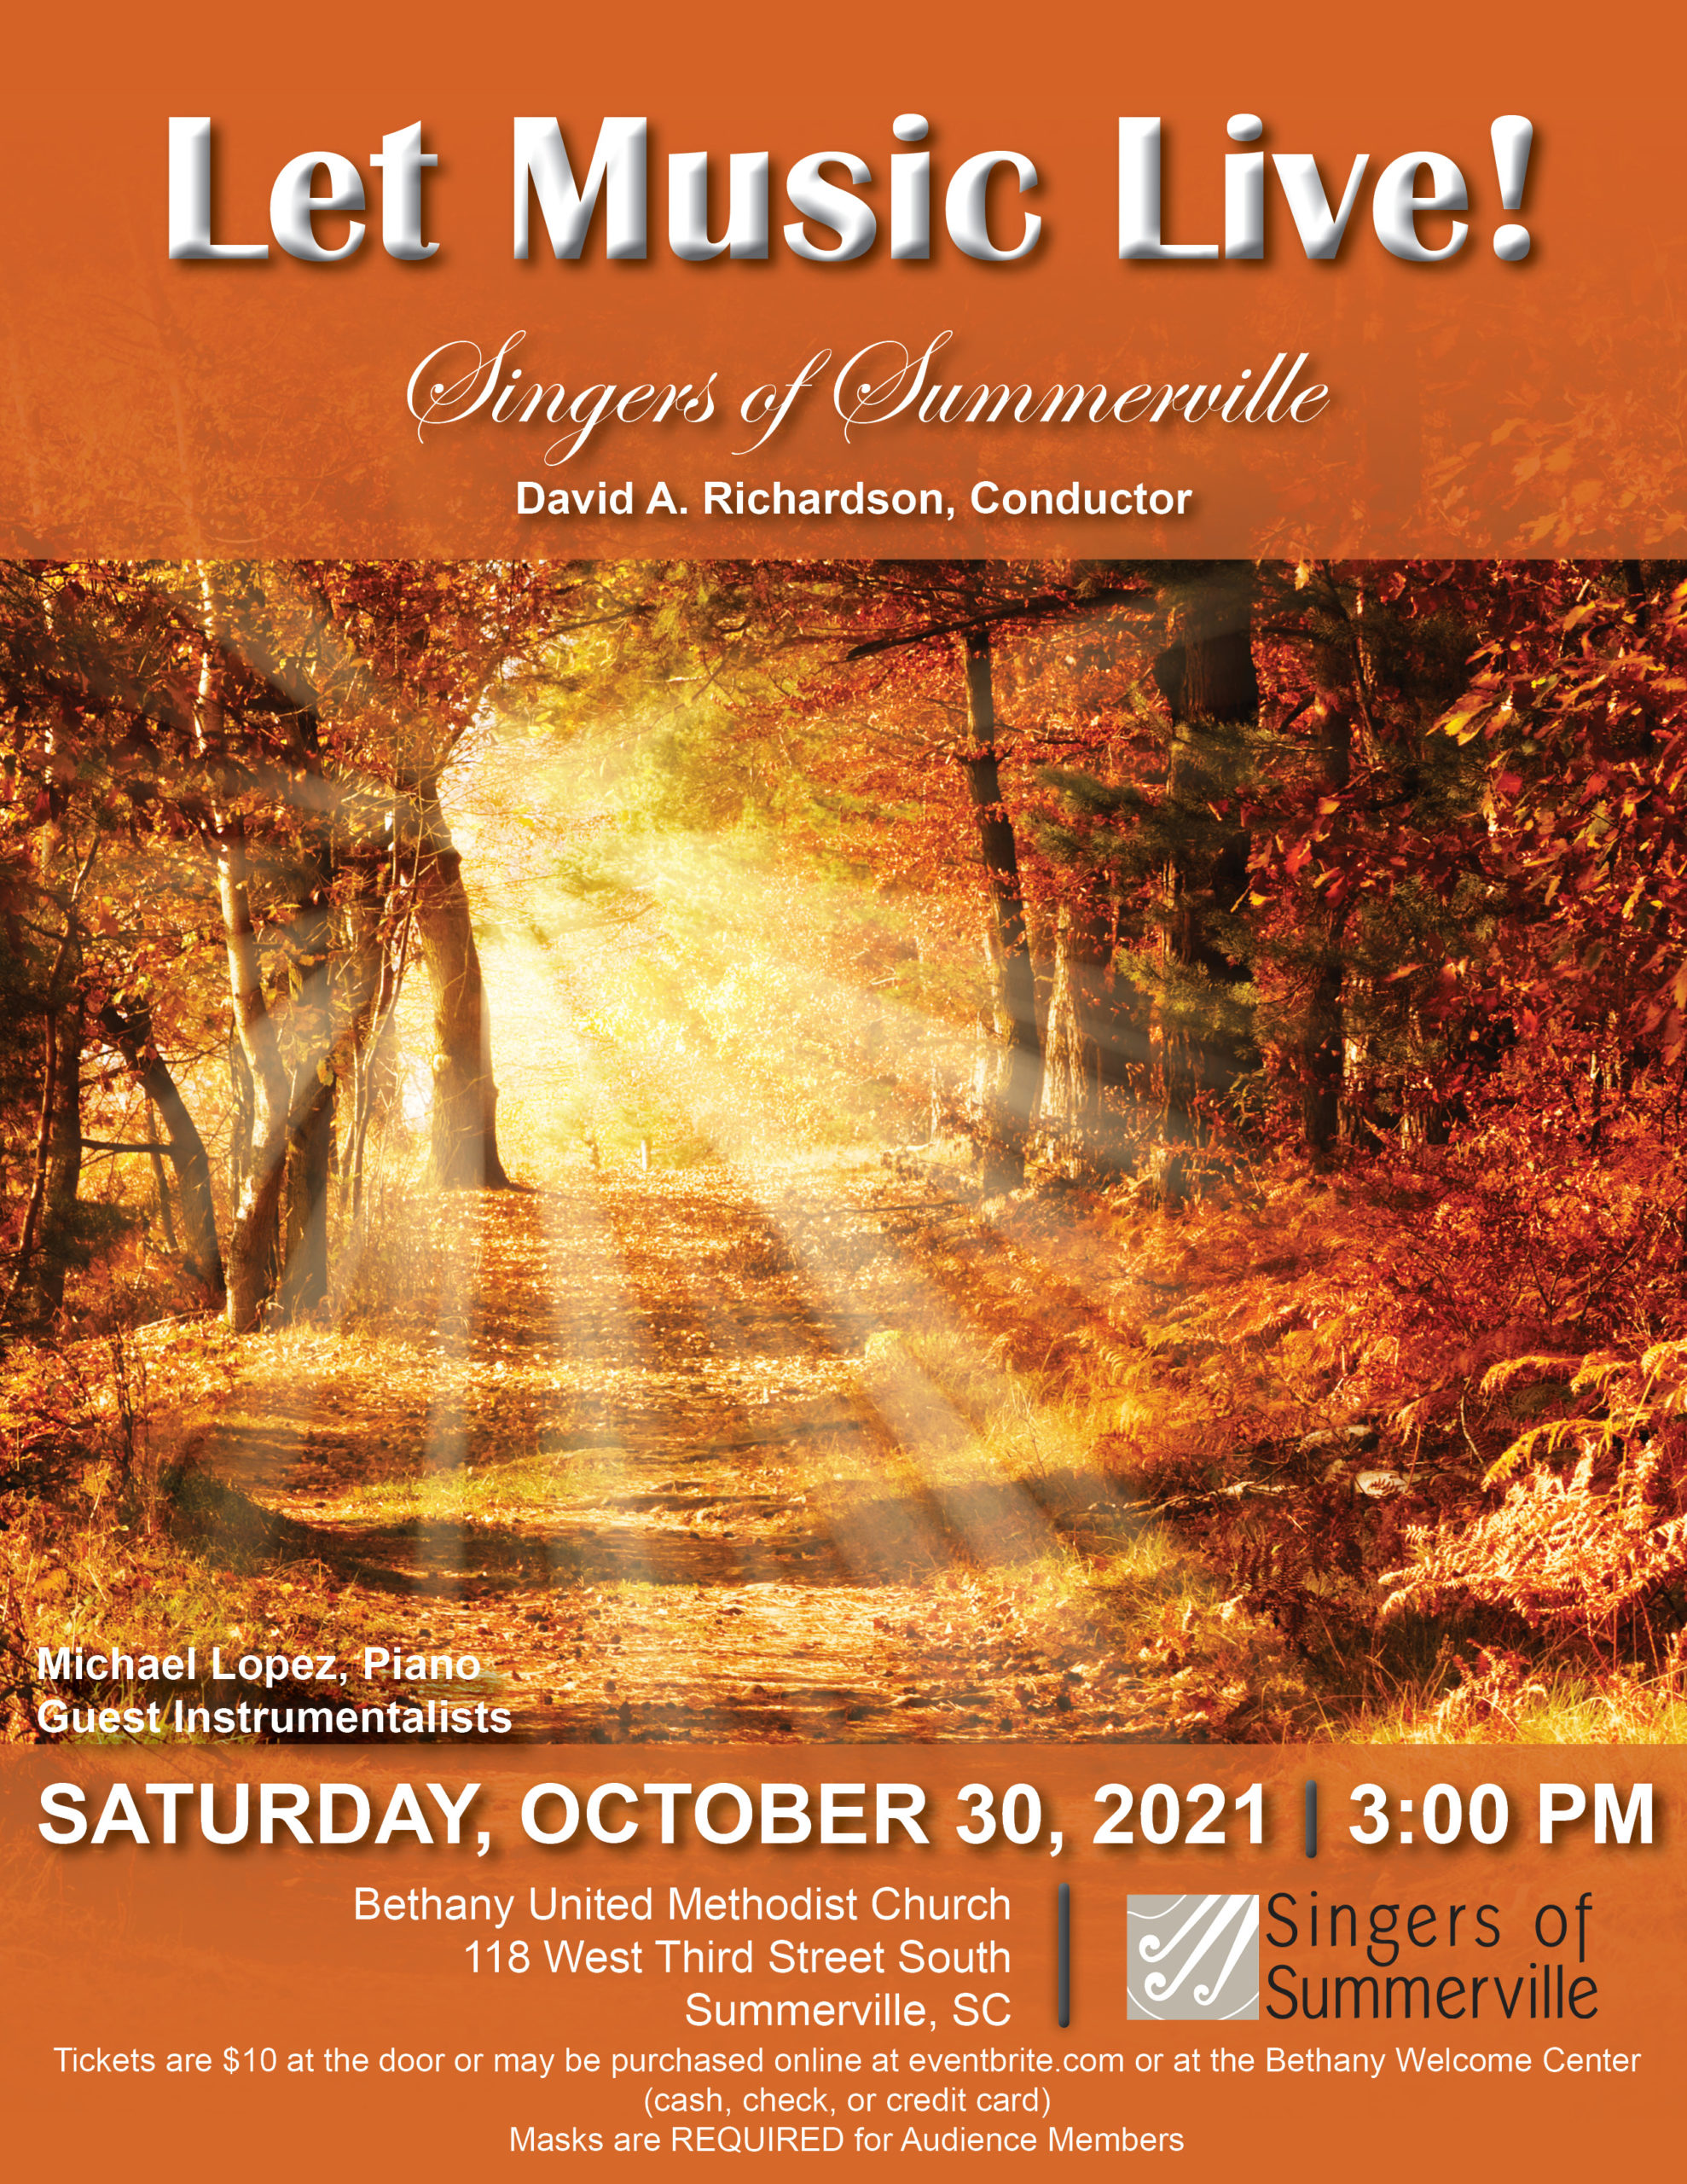 Let Music Live! Singers of Summerville David A. Richardson, Conductor Michael Lopez, Piano Guest Instrumentalists Saturday, October 30, 2021 3:00 PM Bethany United Methodist Church 118 West Third Street South Summerville, SC Tickets are $10 at the door or may be purchased online at eventbrite.com or at the Bethany Welcome Center (cash, check, or credit card) Masks are REQUIRED for Audience Members